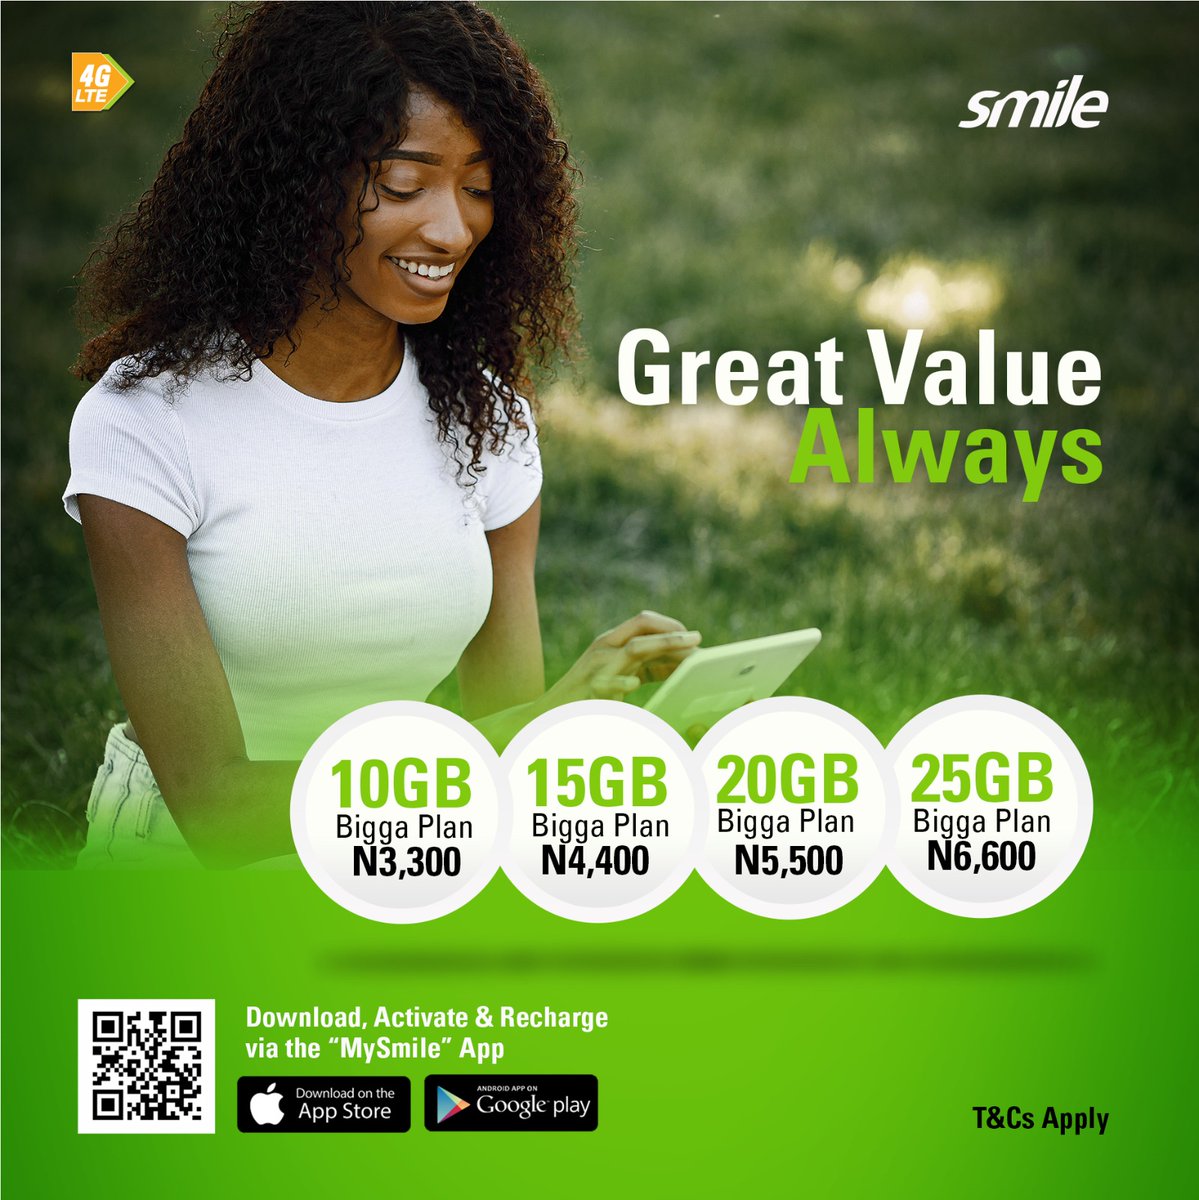 Focus on the bigger picture! It is great value always here at Smile. Get a Bigga plan from N1,100 and enjoy great value indeed Click bit.ly/3g9okNI now. Smile #smile #data #monday #Internet